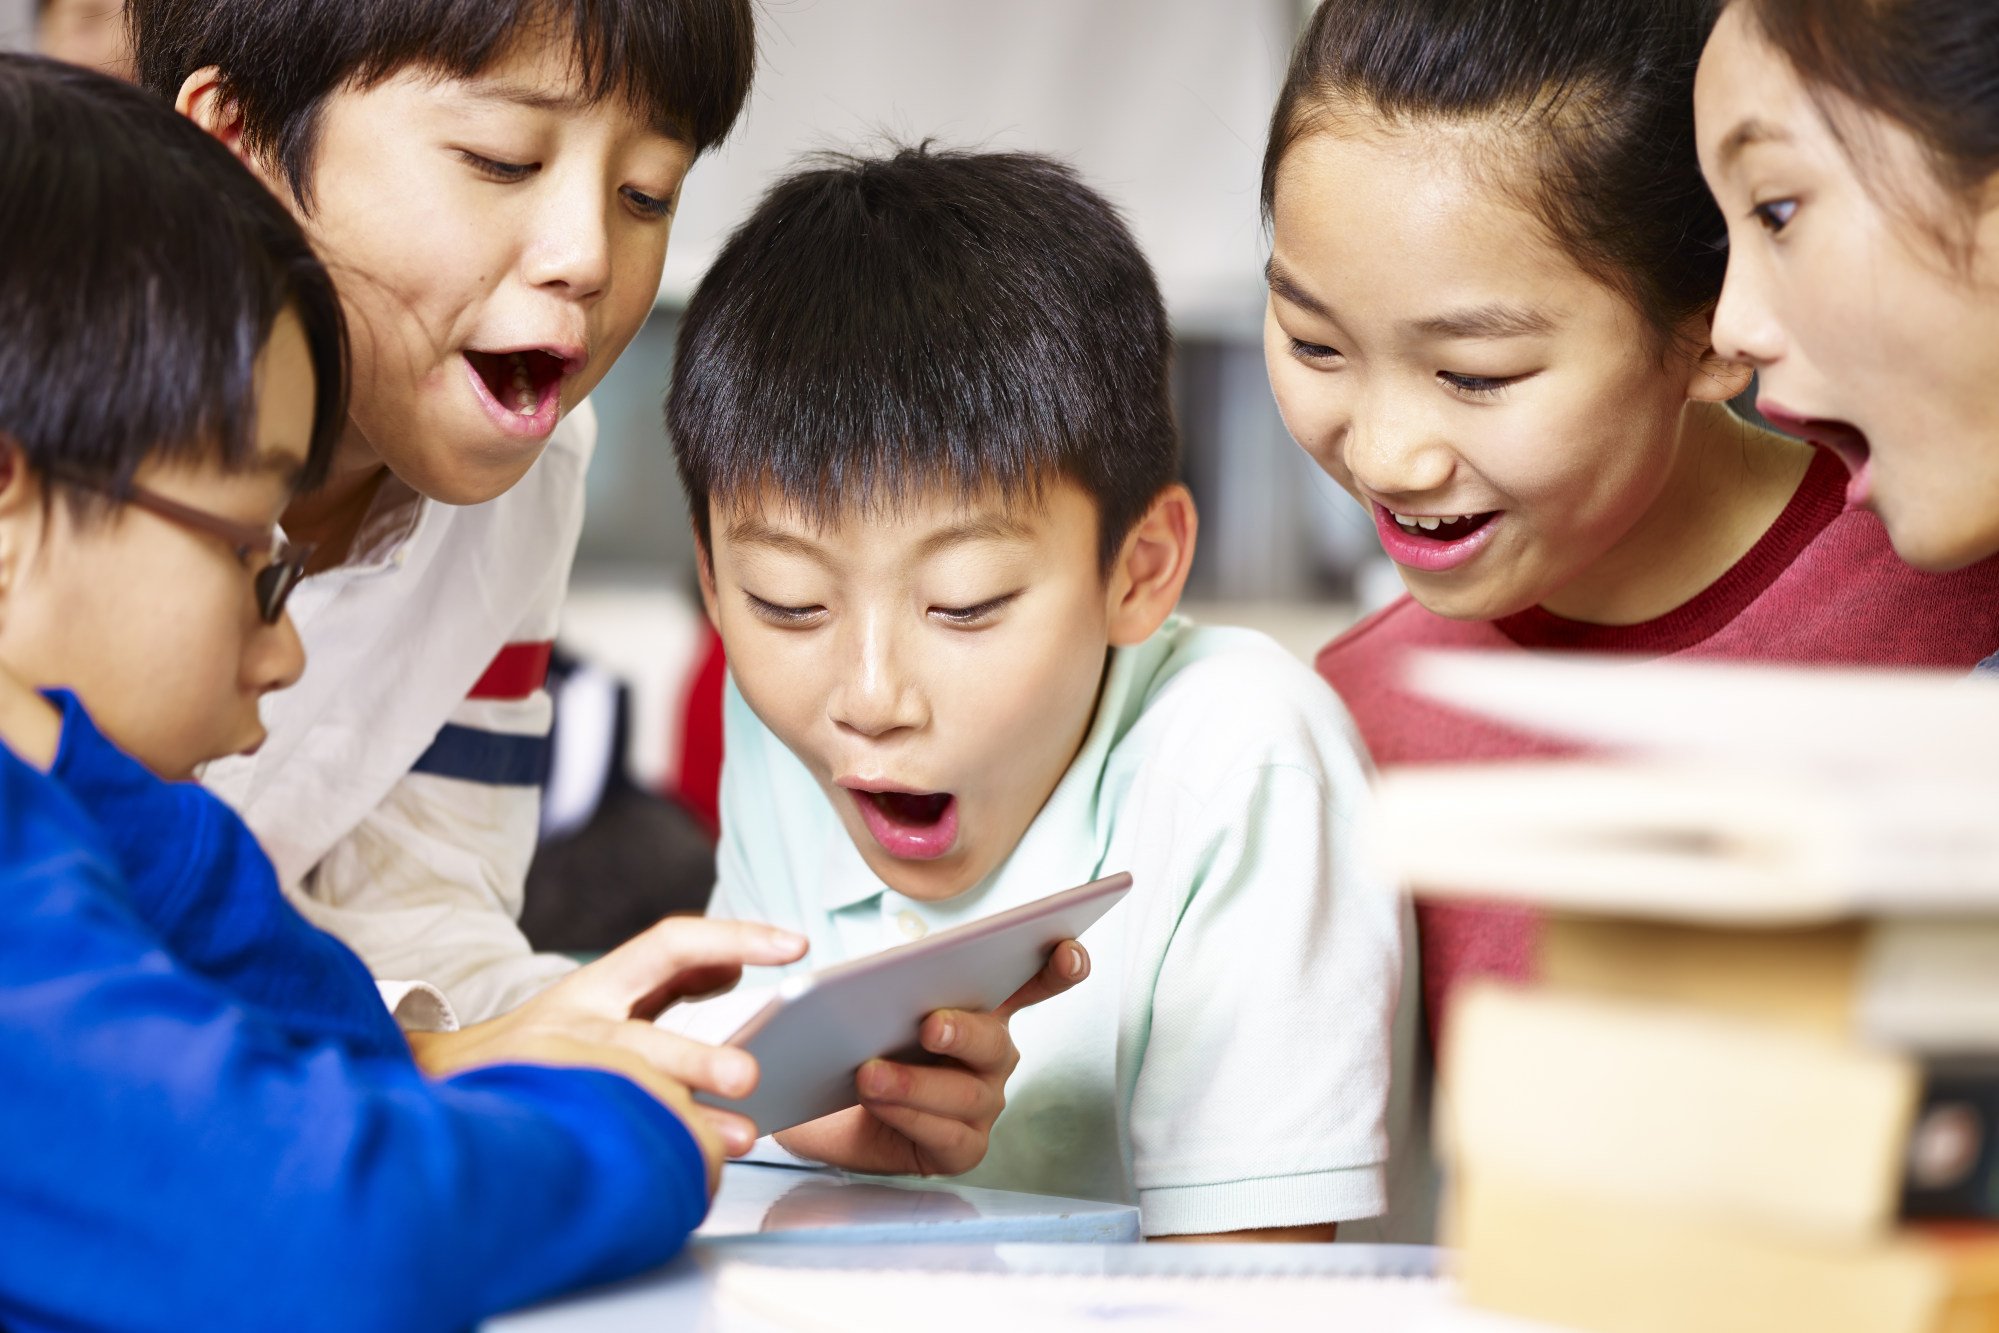 Children in China are often put under immense pressure by their parents to perform to a standard of excellence at school. Photo: Shutterstock